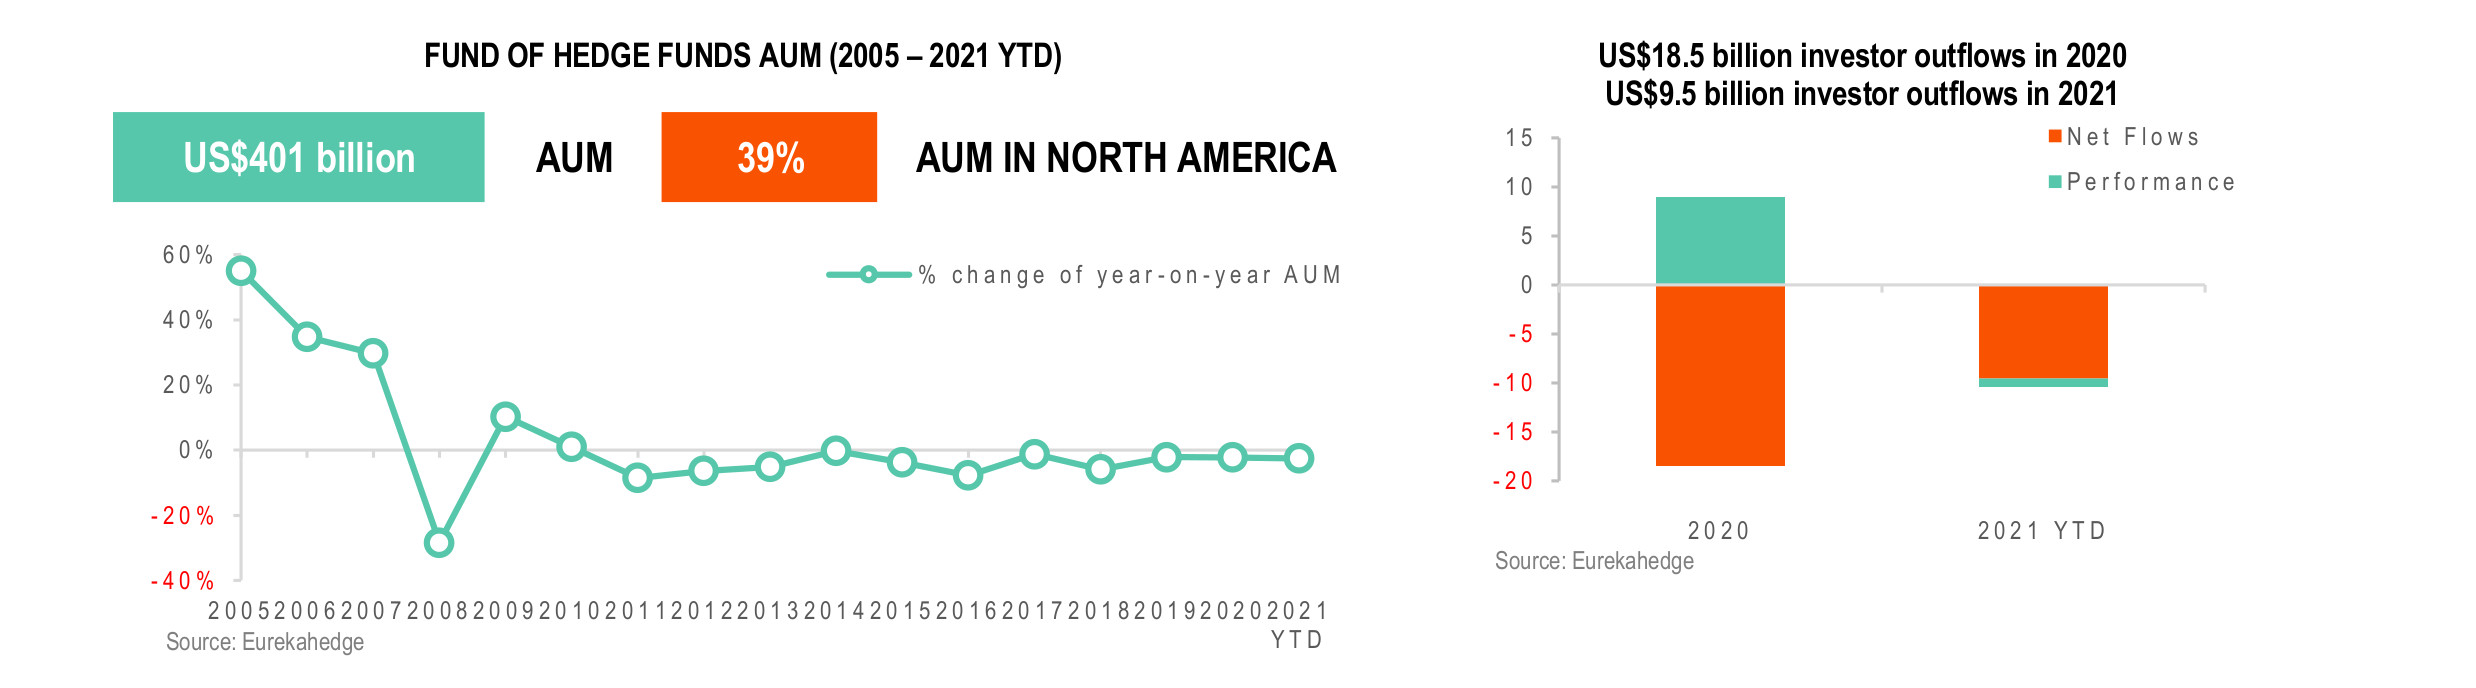 Fund of Hedge Funds Infographic March 2021 - AUM